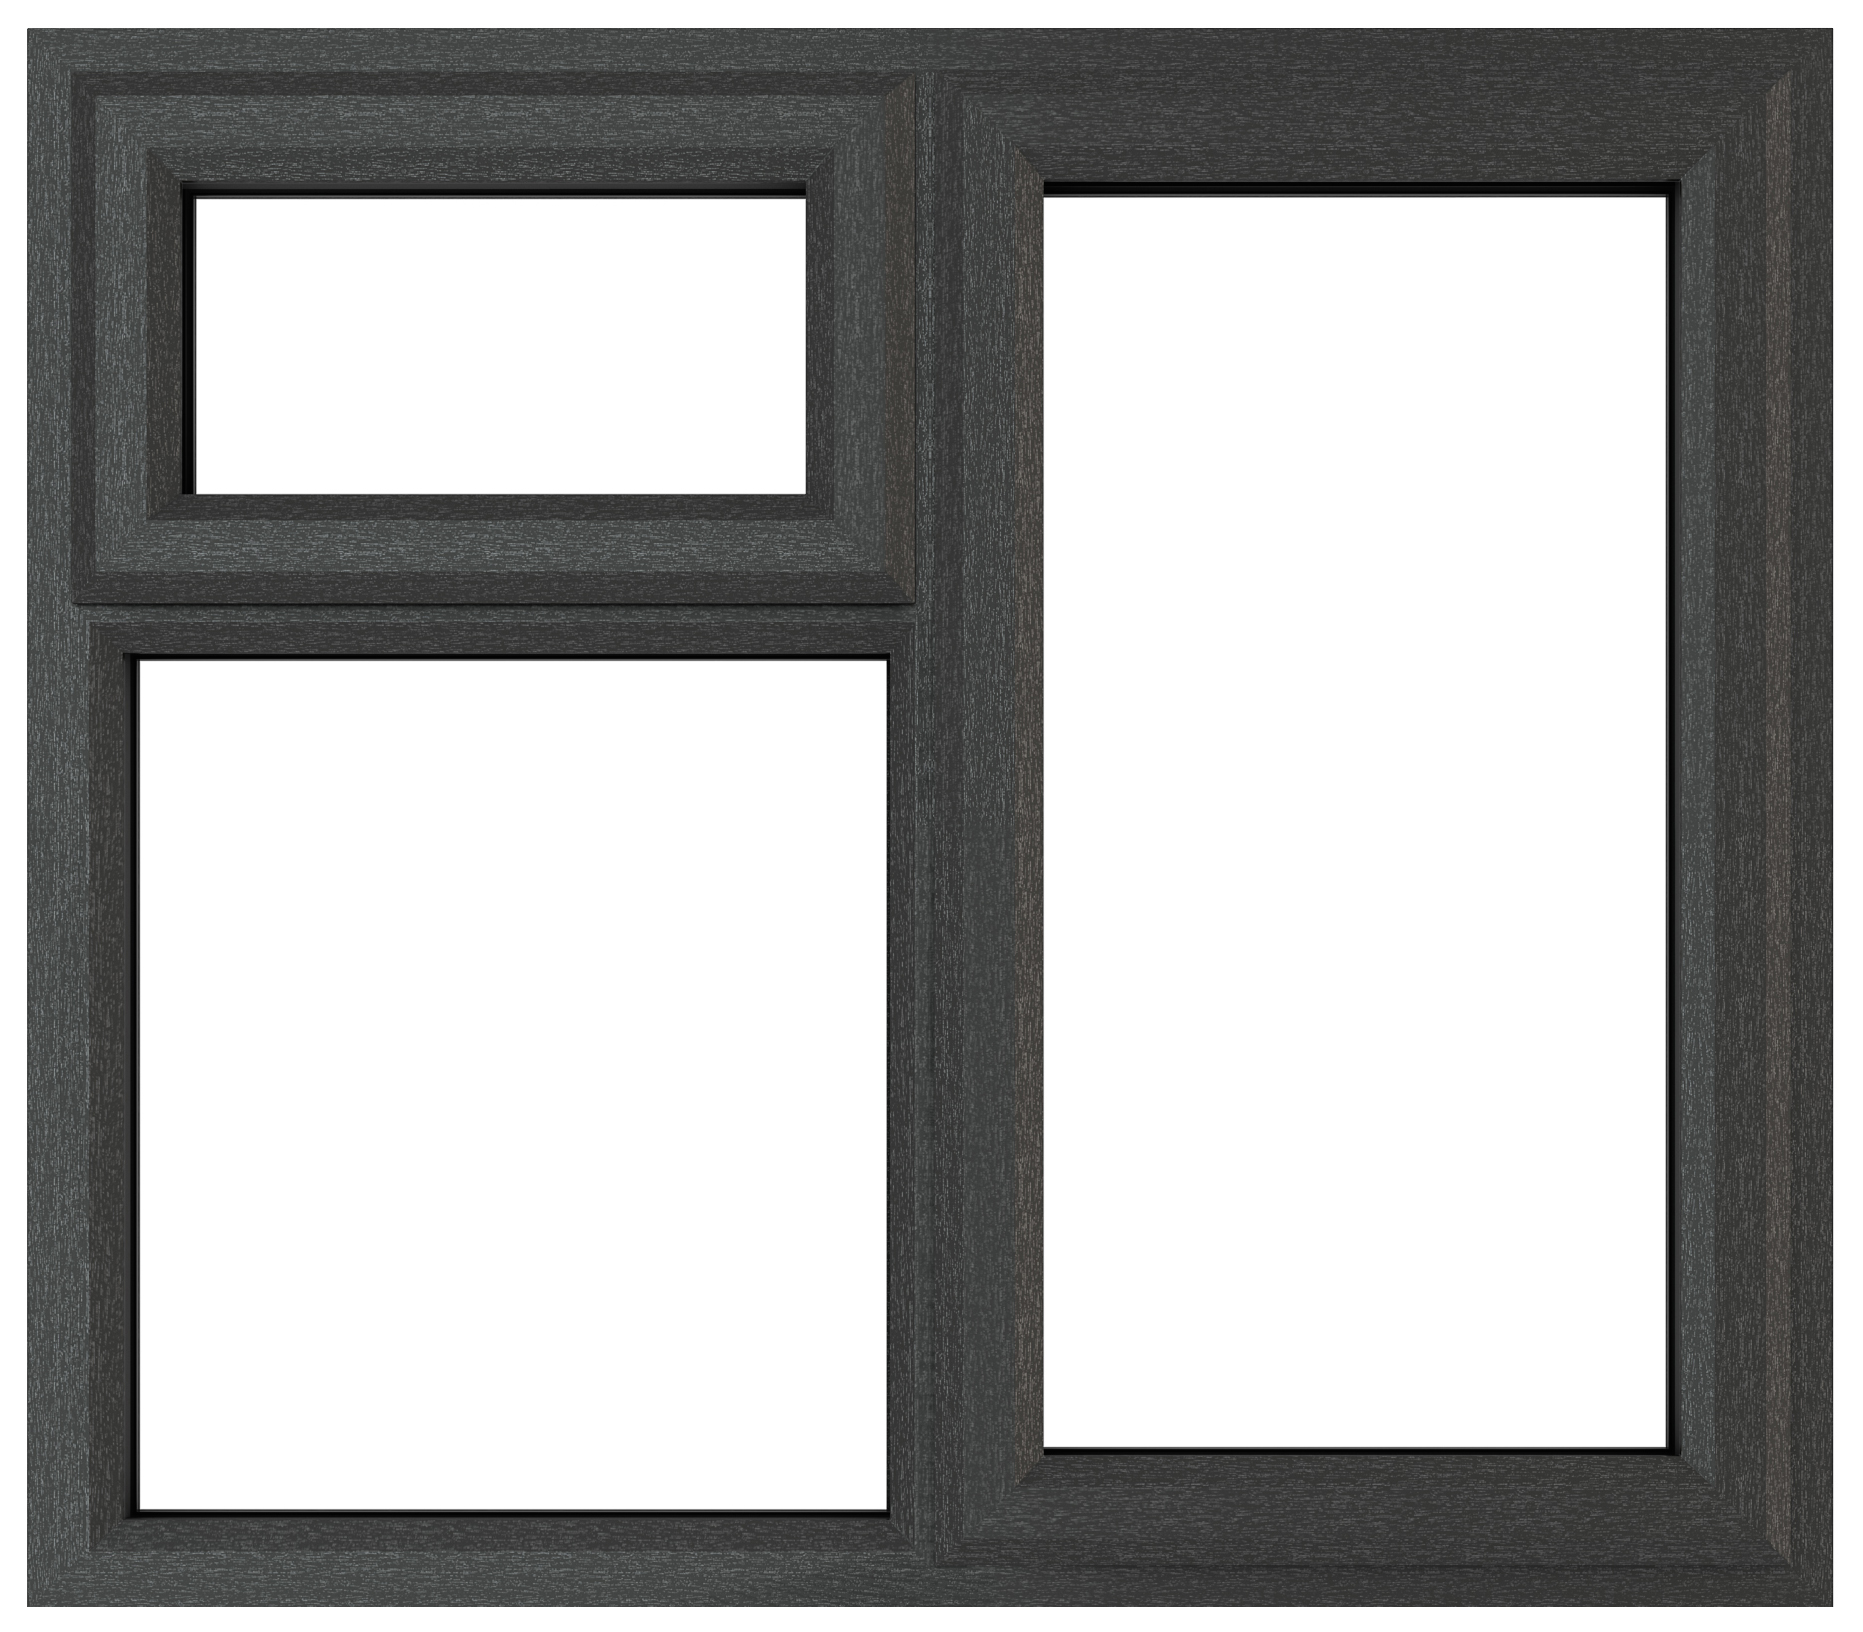 Crystal uPVC Grey / White Right Hung Top Opener Clear Triple Glazed Window - 1190 x 965mm